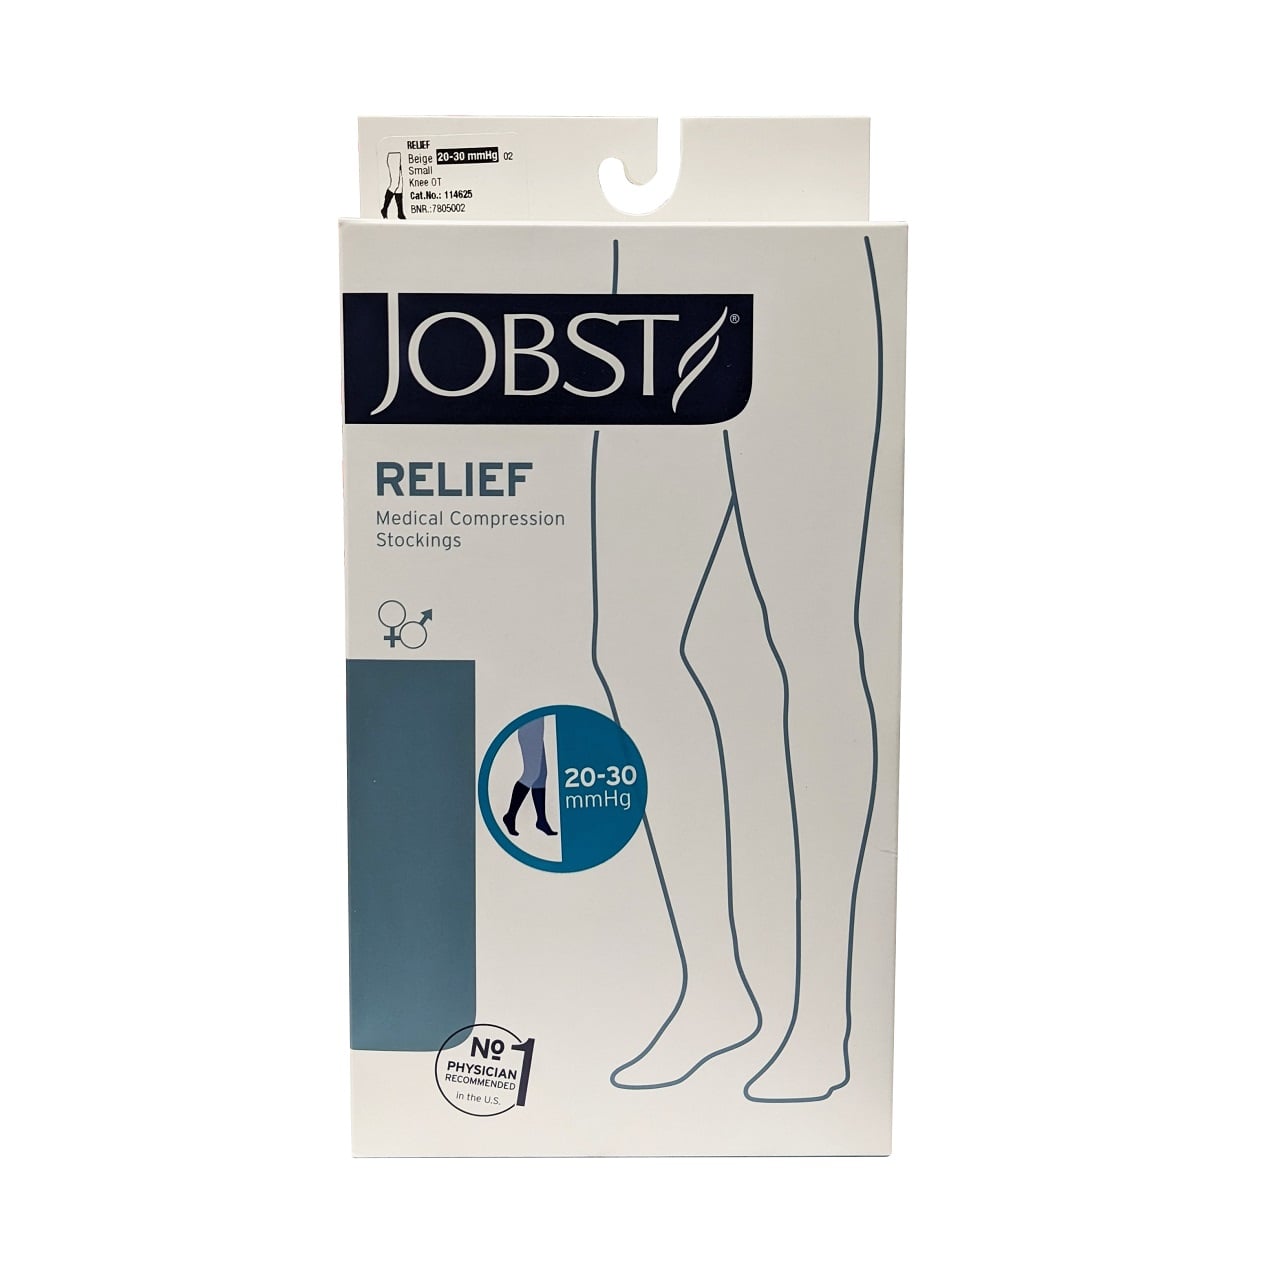 Product label for Jobst Relief Compression Socks 20-30 mmHg - Knee High / Open Toe / Beige (Small)